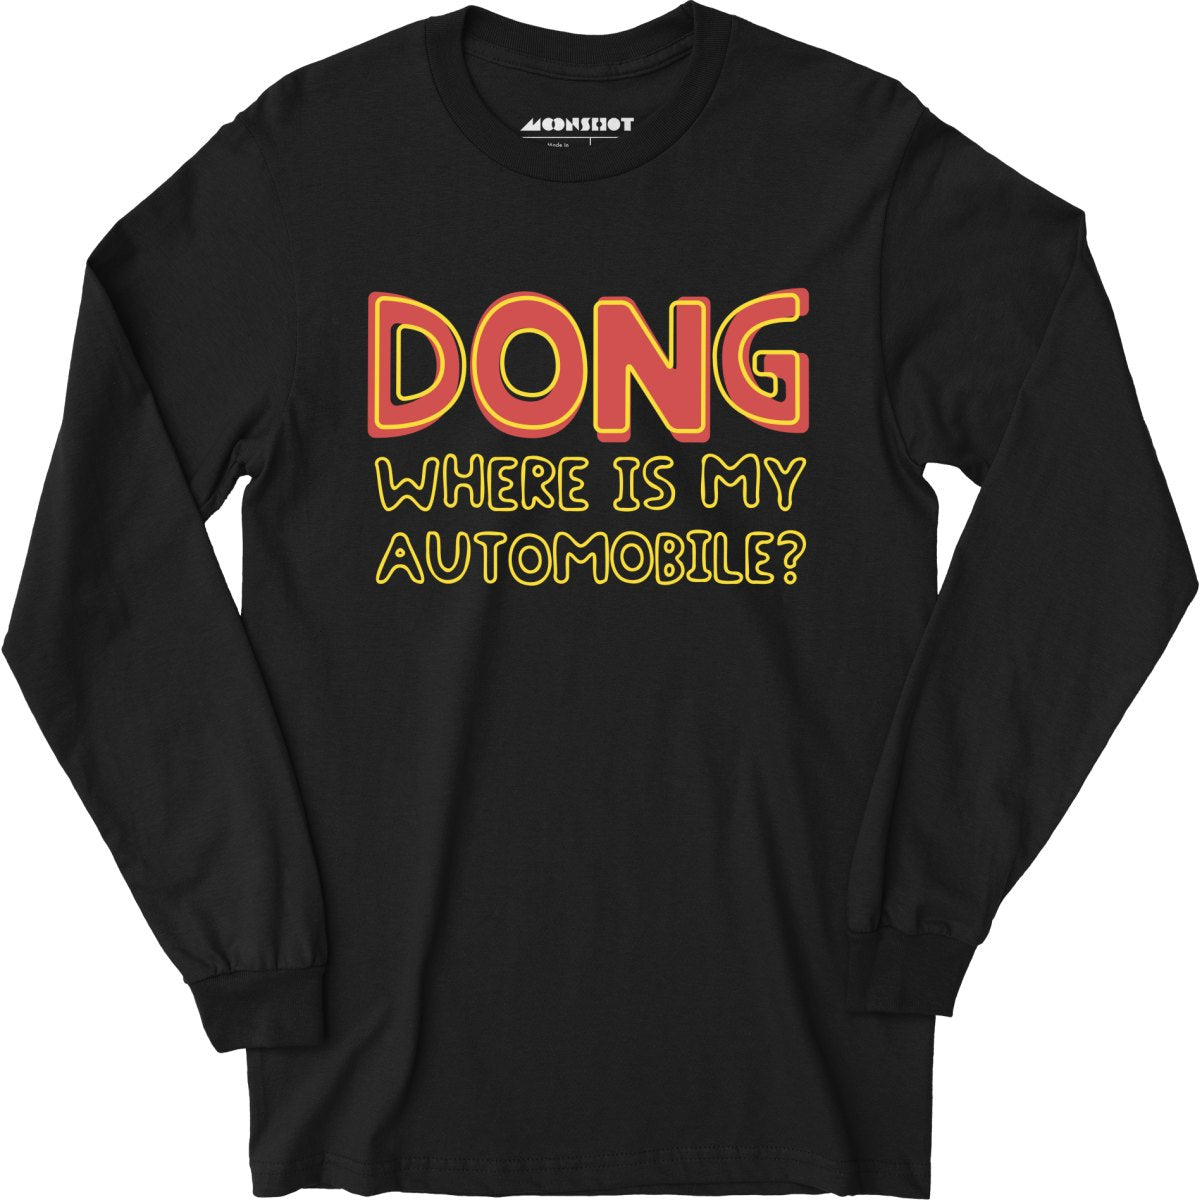 Dong Where is My Automobile? - Long Sleeve T-Shirt